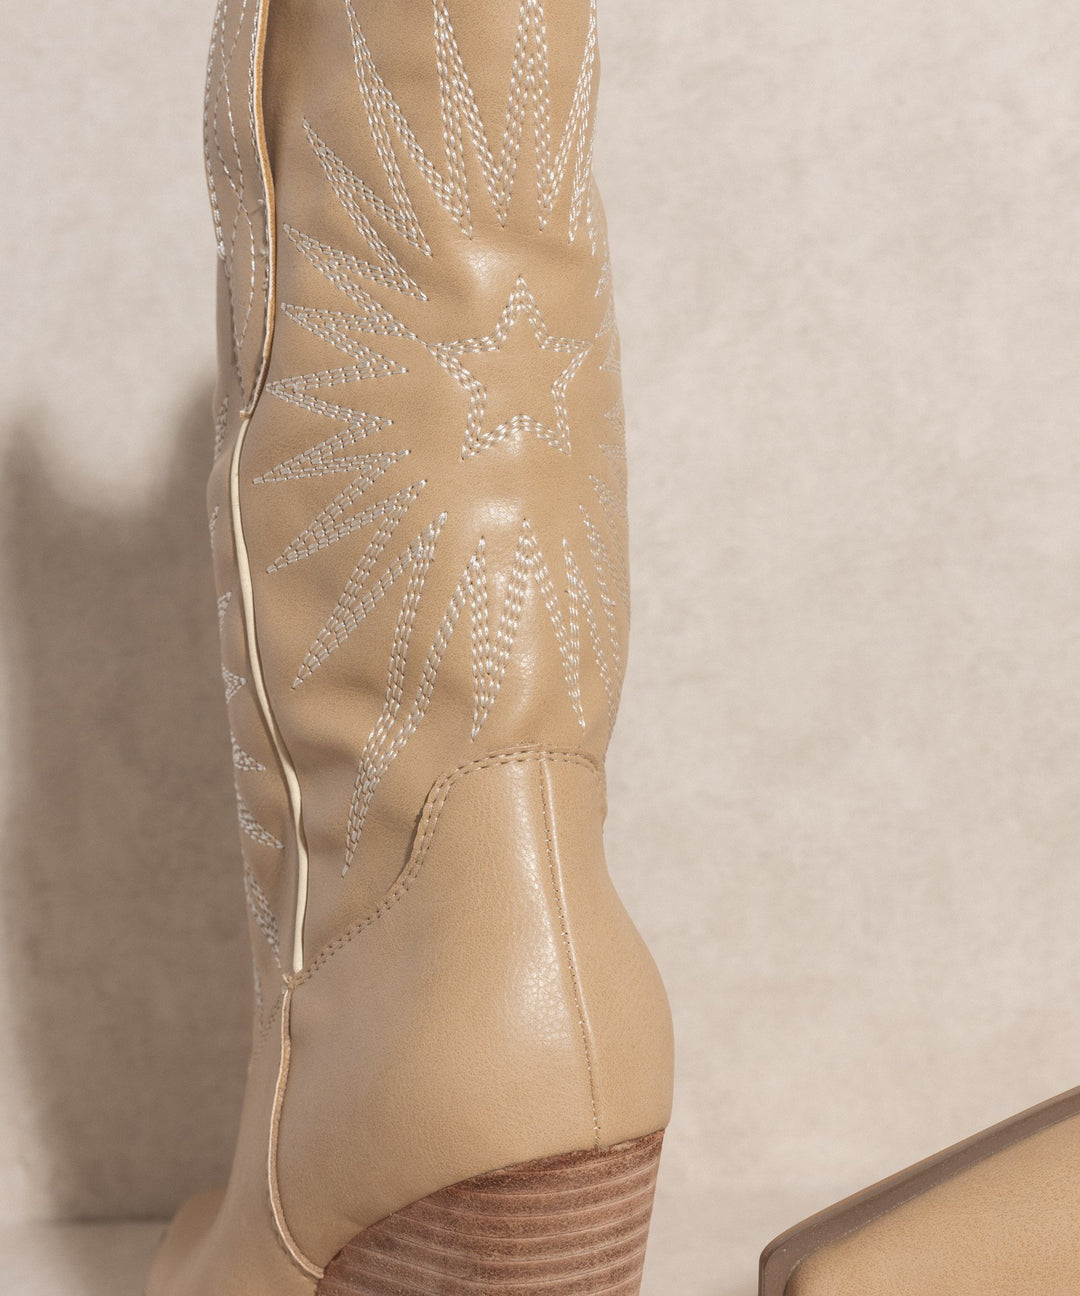 Emersyn Starburst Embroidery Boot